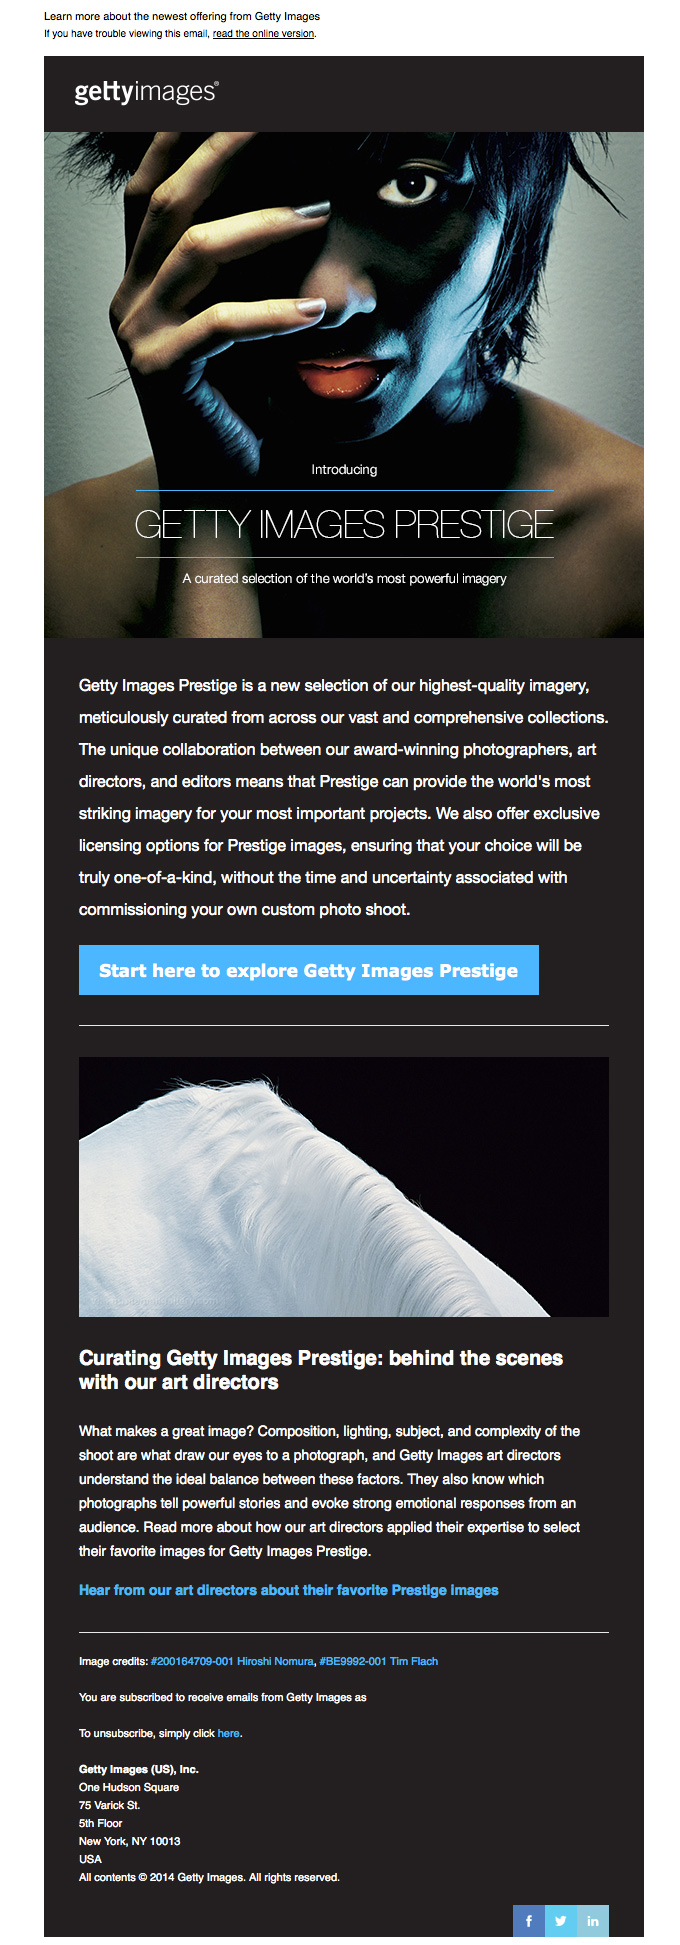 Getty Images Prestige Intro email